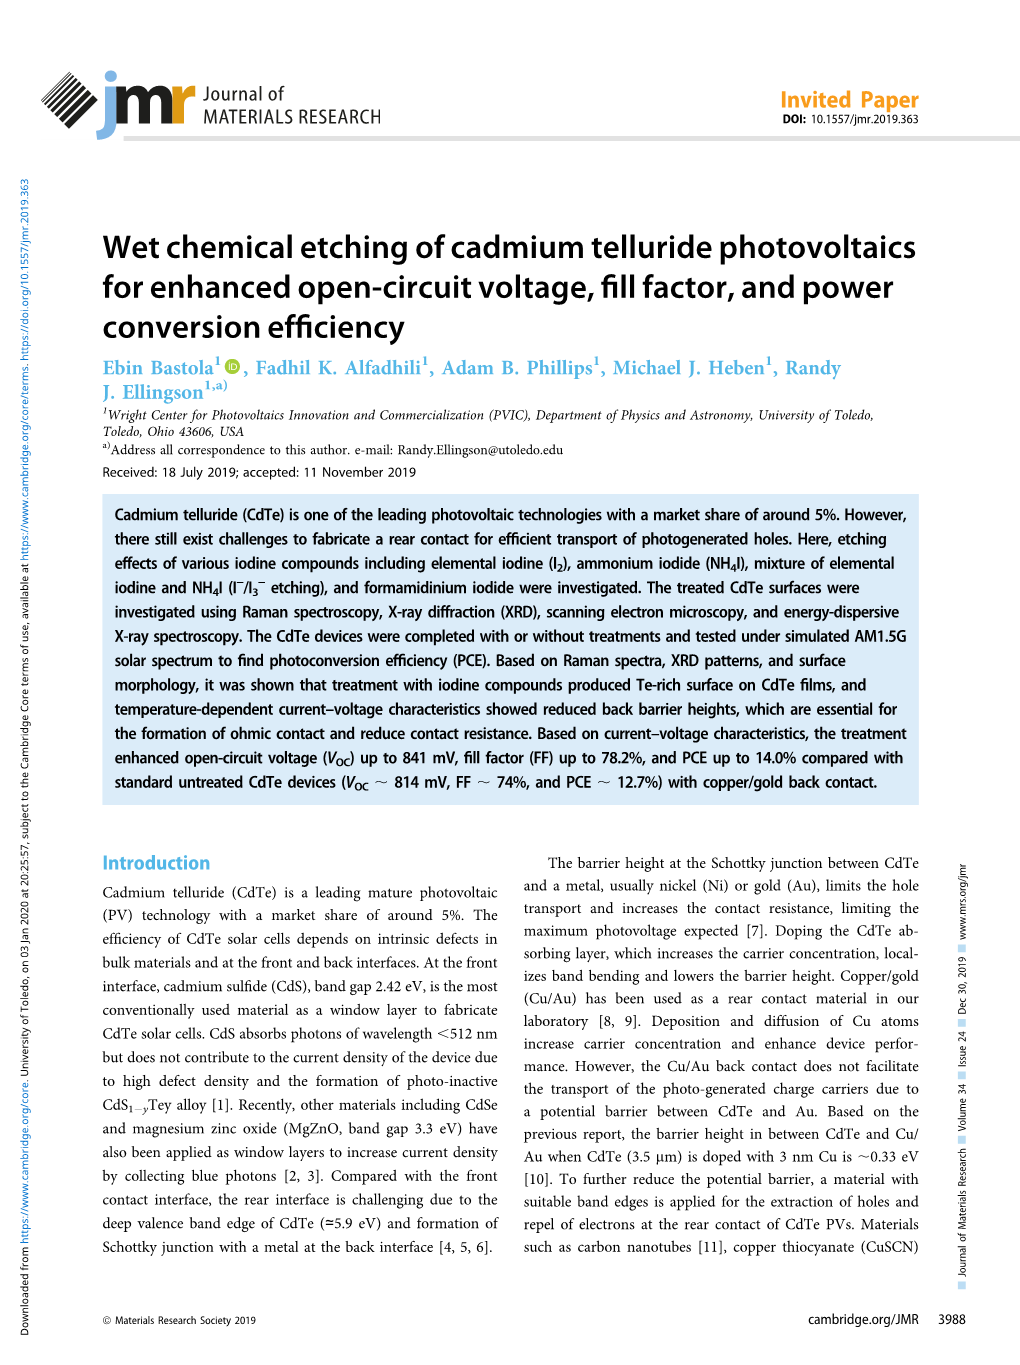 Wet Chemical Etching of Cadmium Telluride Photovoltaics for Enhanced Open-Circuit Voltage, Fill Factor, and Power Conversion